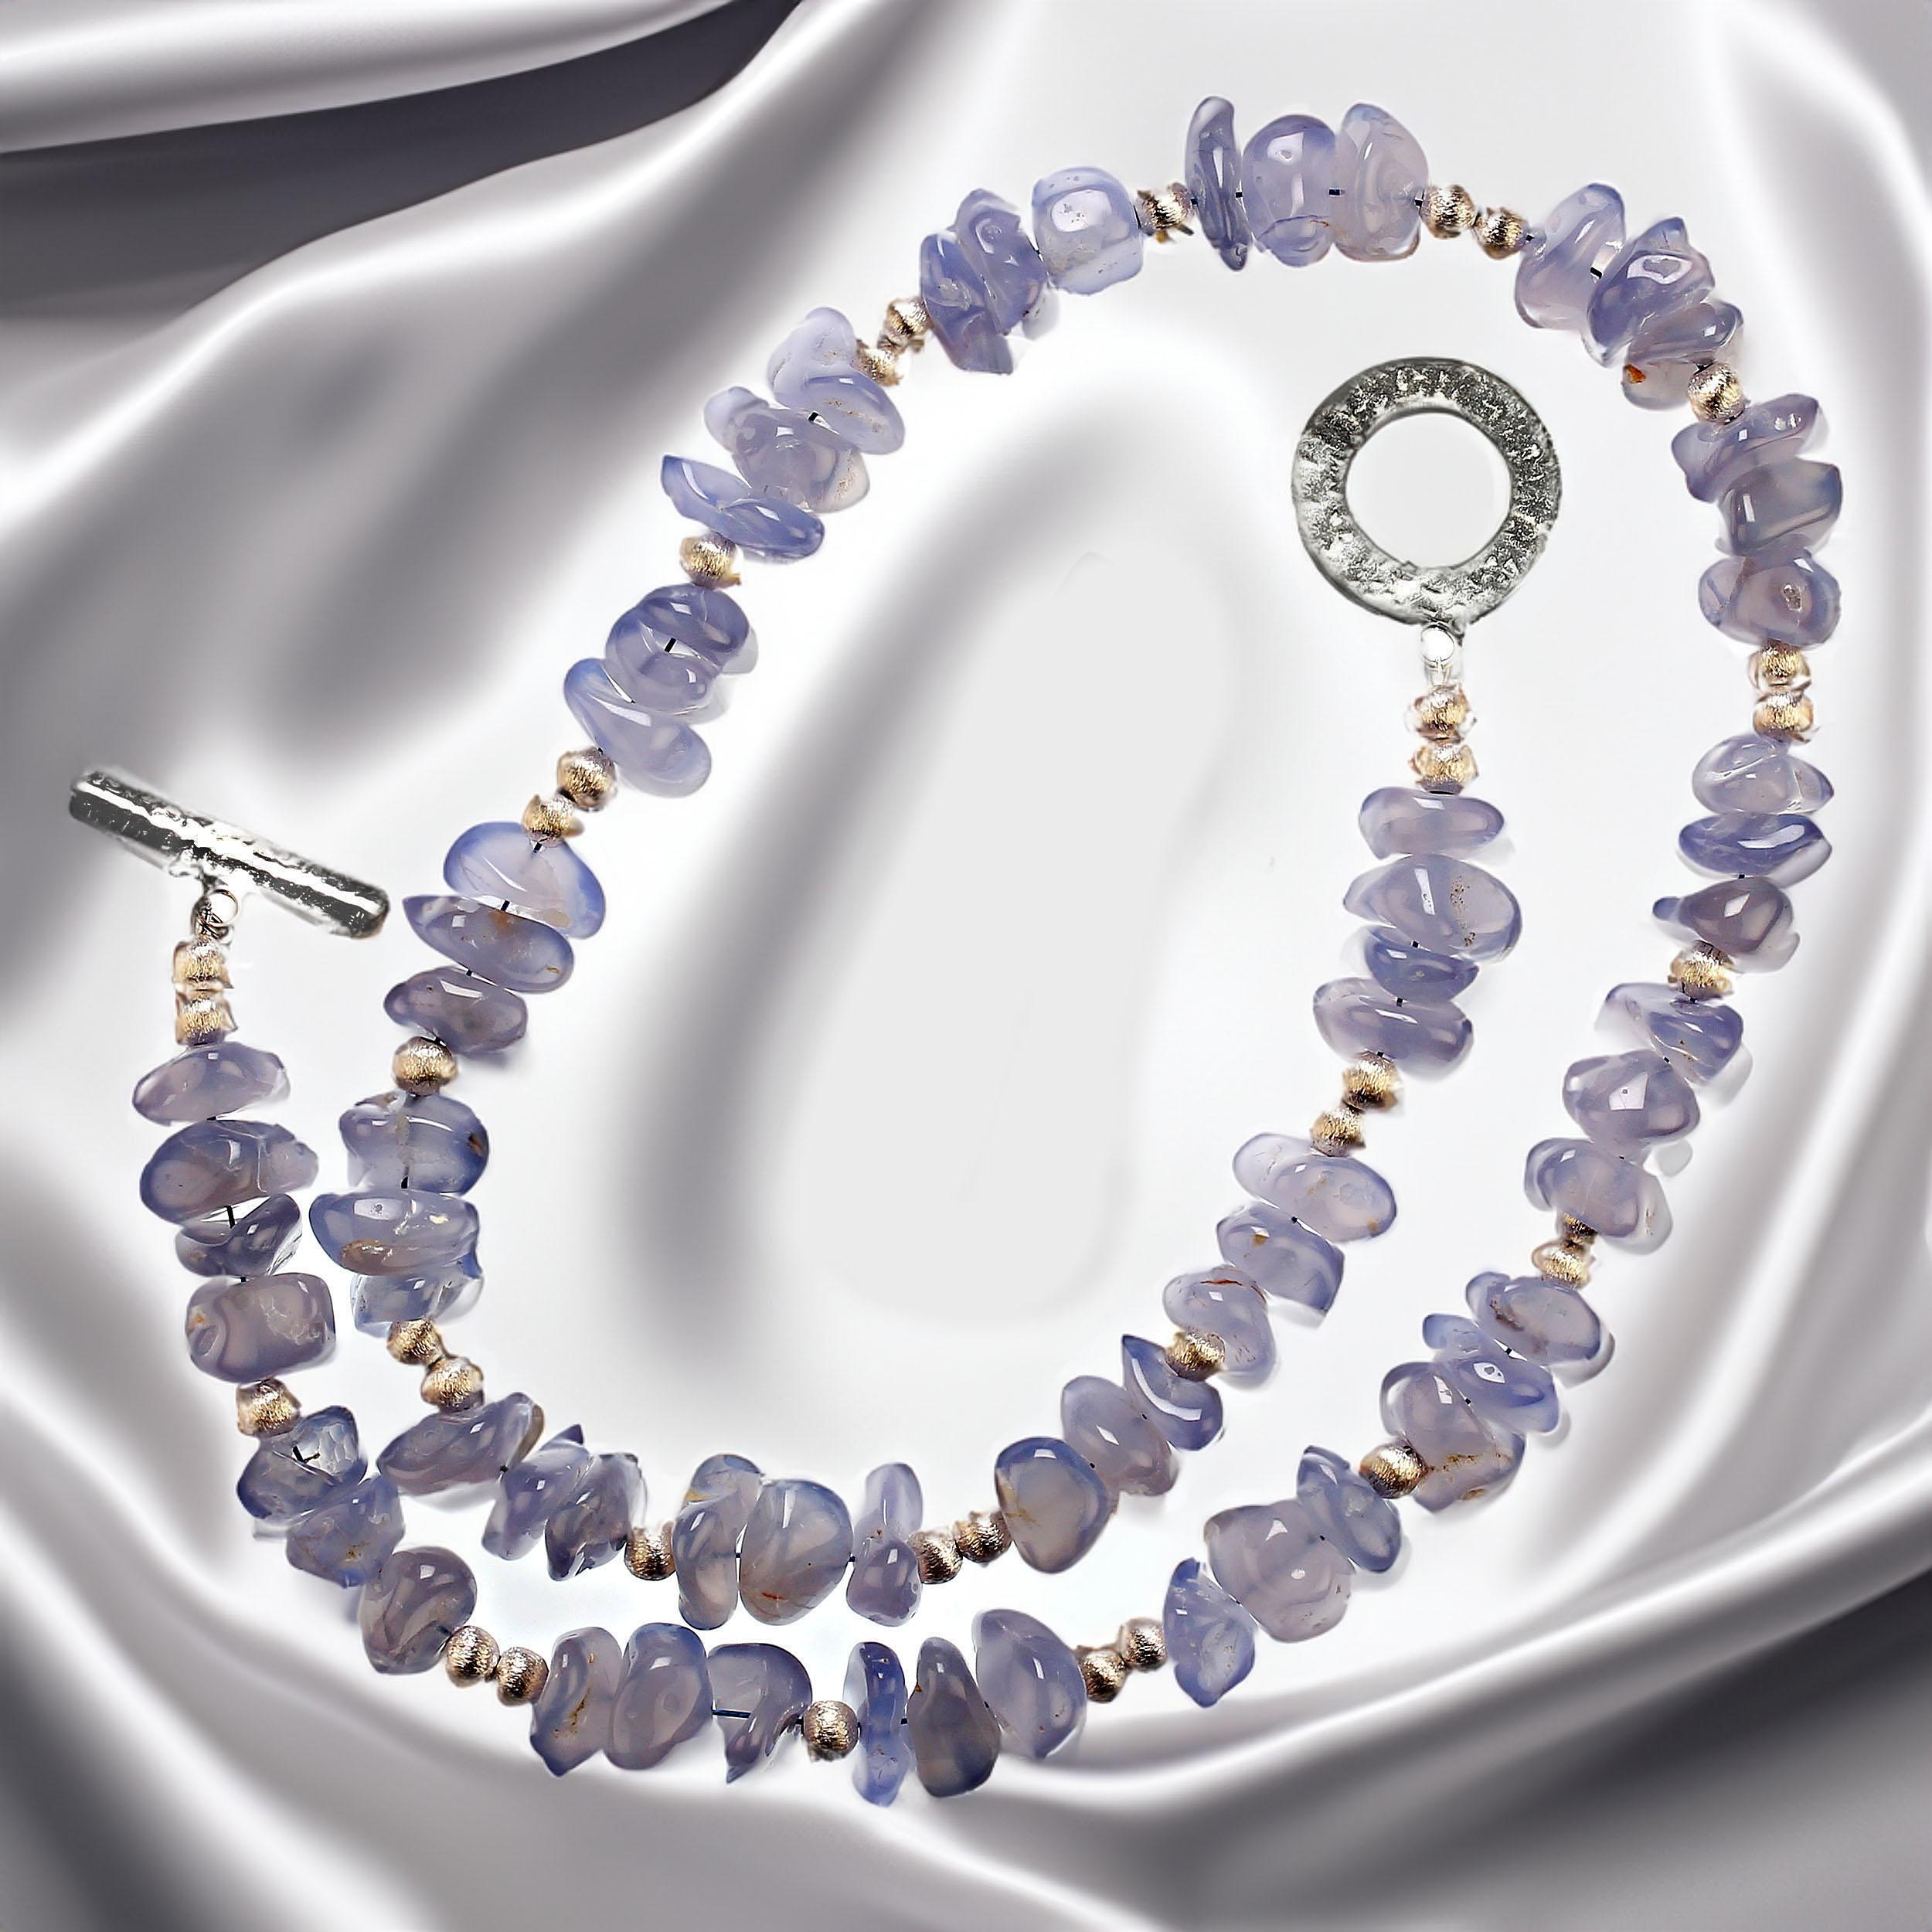 Fabulous 24-inch blue chalcedony highly polished nugget, 10x10mm, necklace with brushed silver tone accents.   This unique necklace features a hammered sterling silver toggle clasp.  MN2358